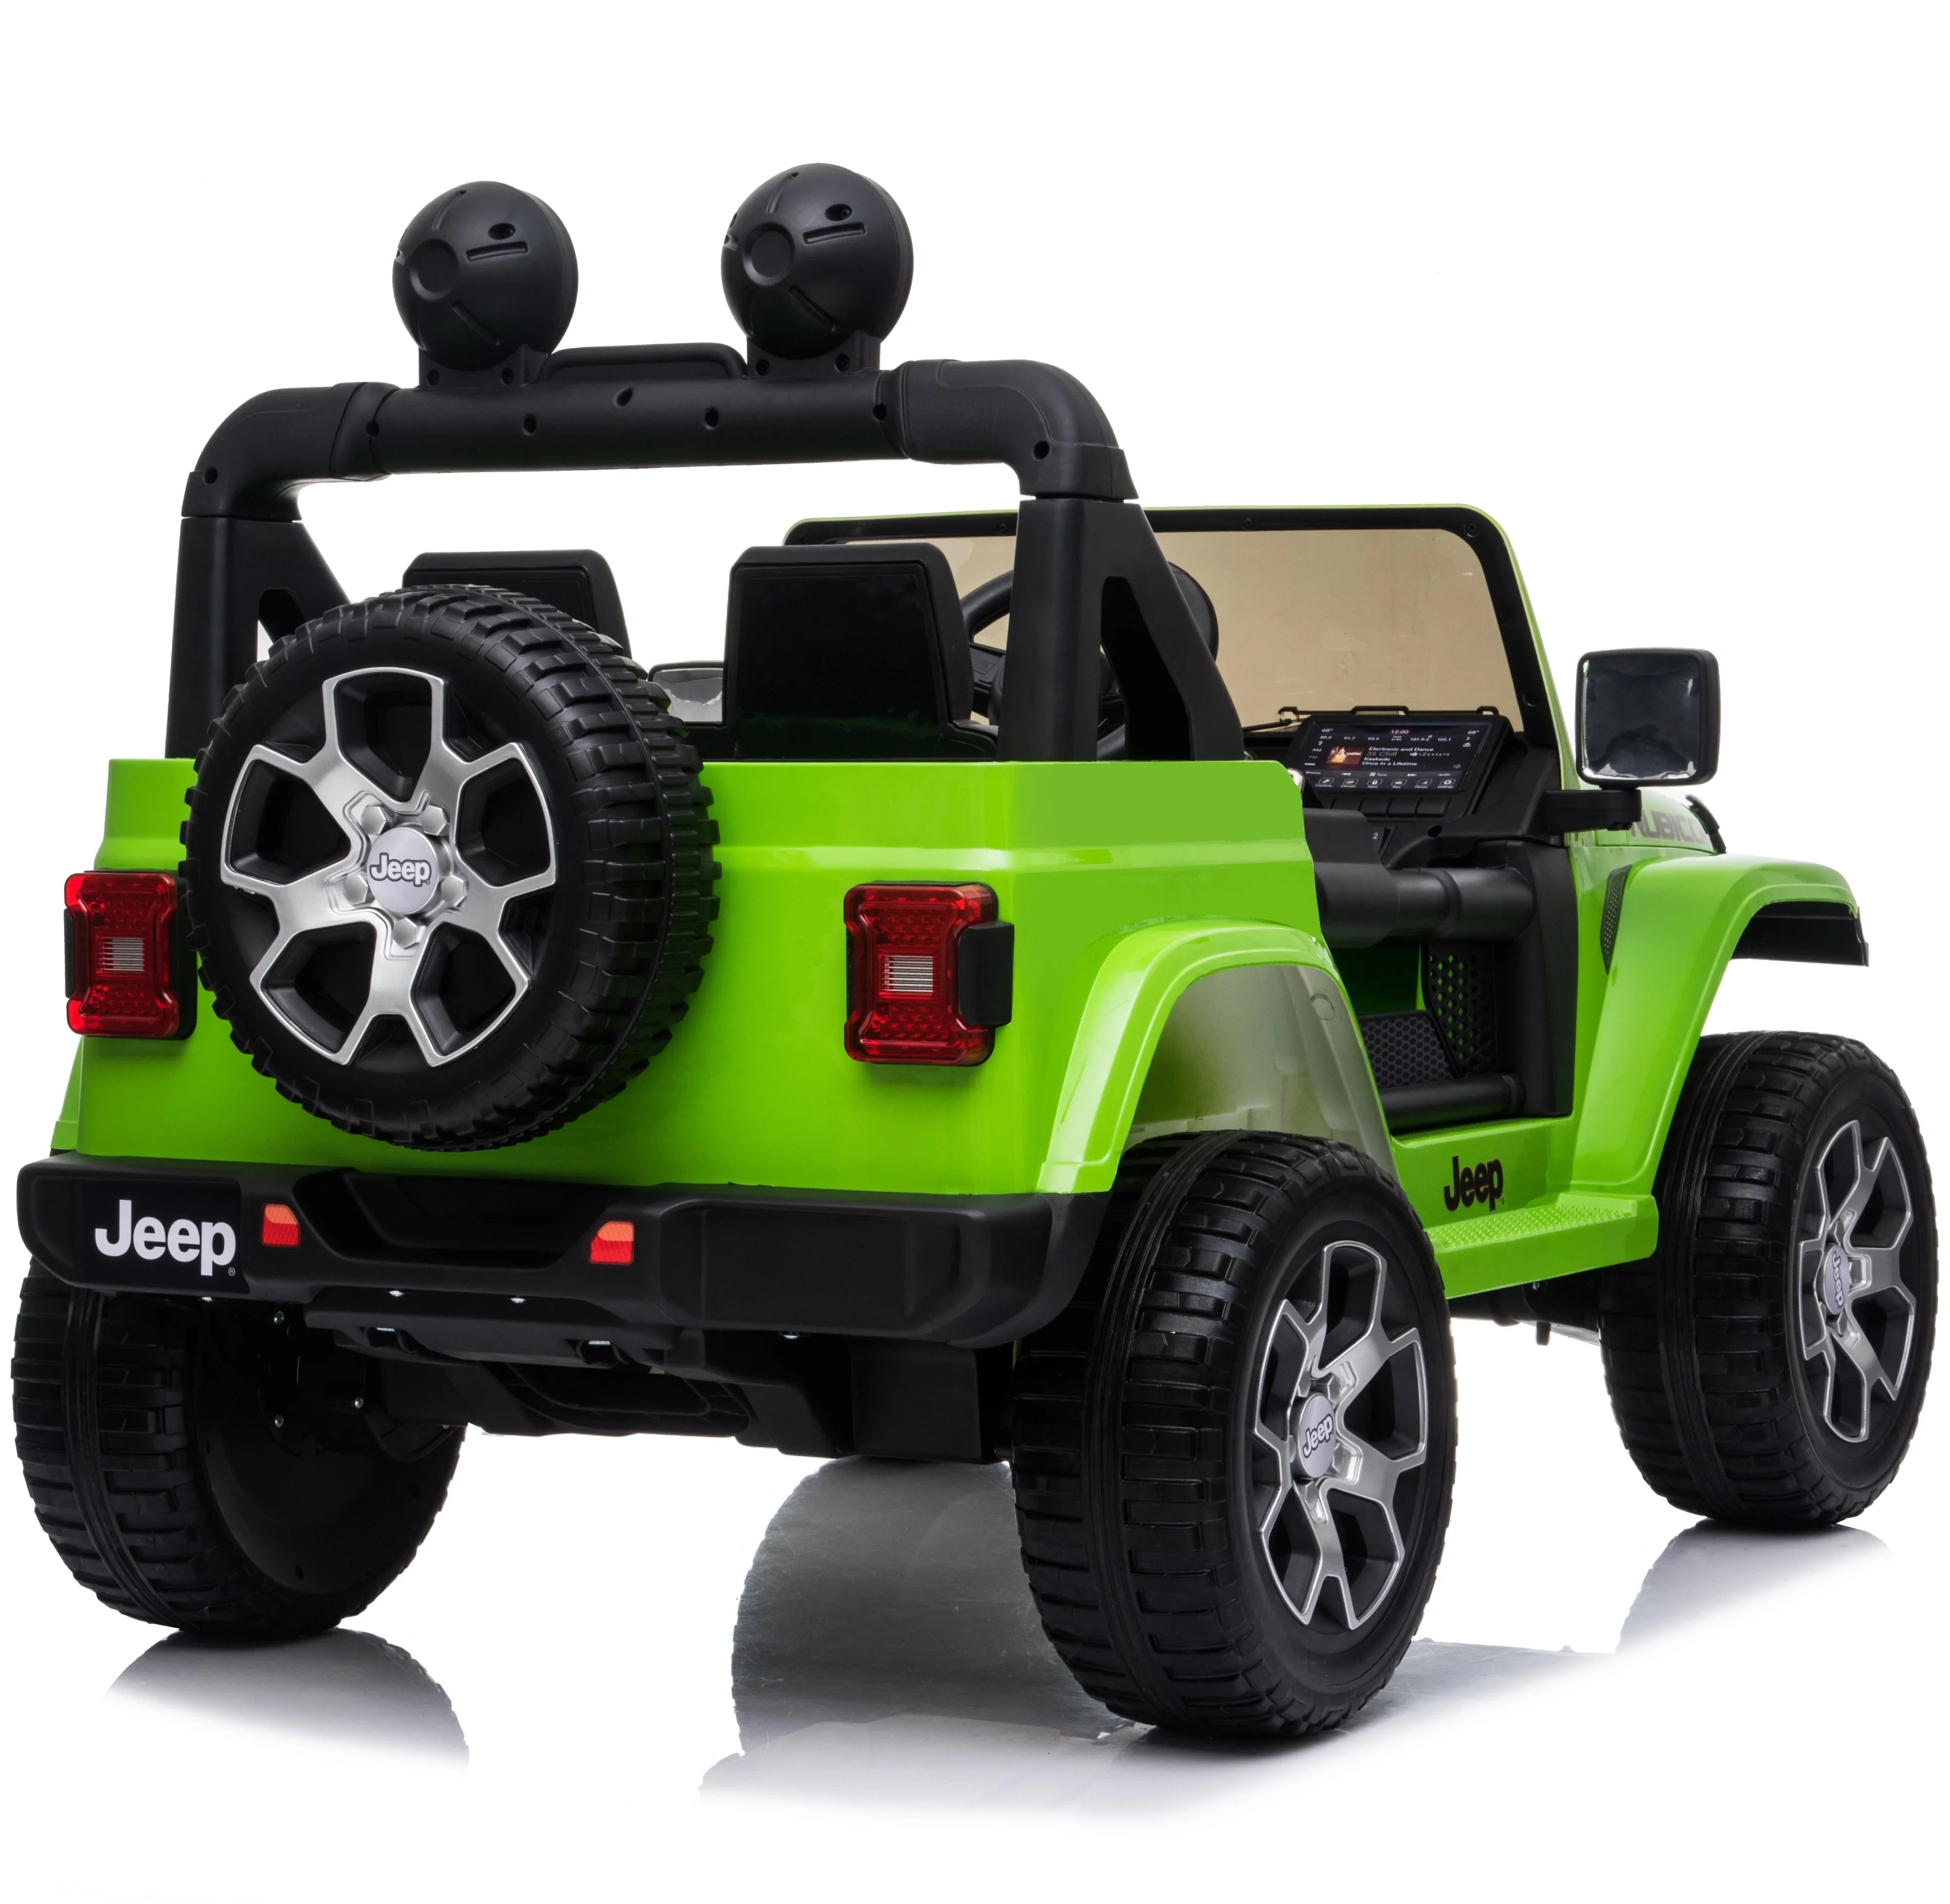 Green Rubicon 4WD 12V electric ride-on car for children on a white background